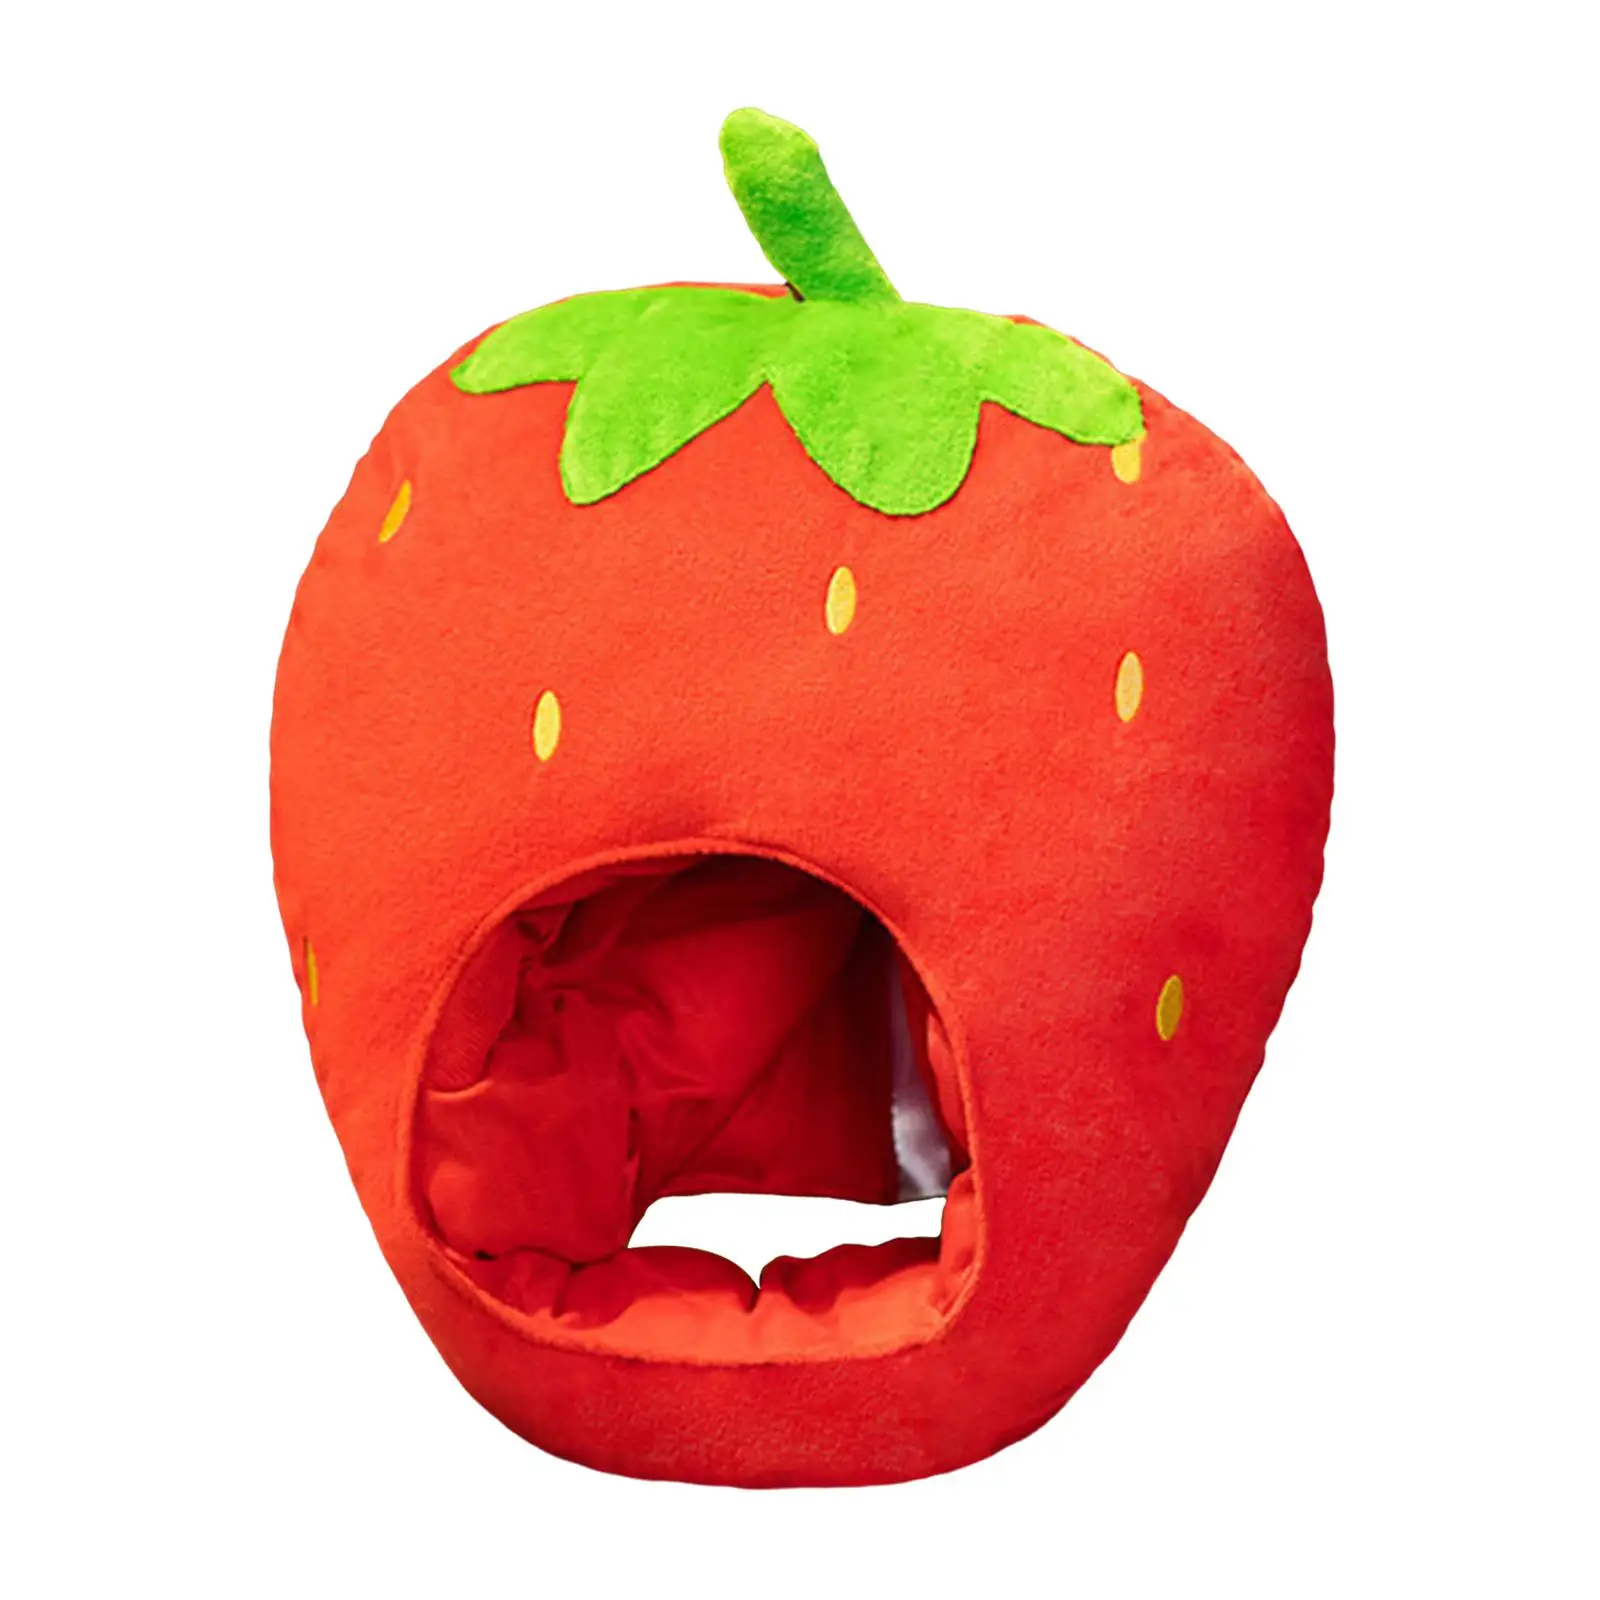 Soft Strawberry Hat Decor Head Warmer Comfortable Novelty Costume Hat Headdress for Cosplay Party Halloween Holiday Women Men